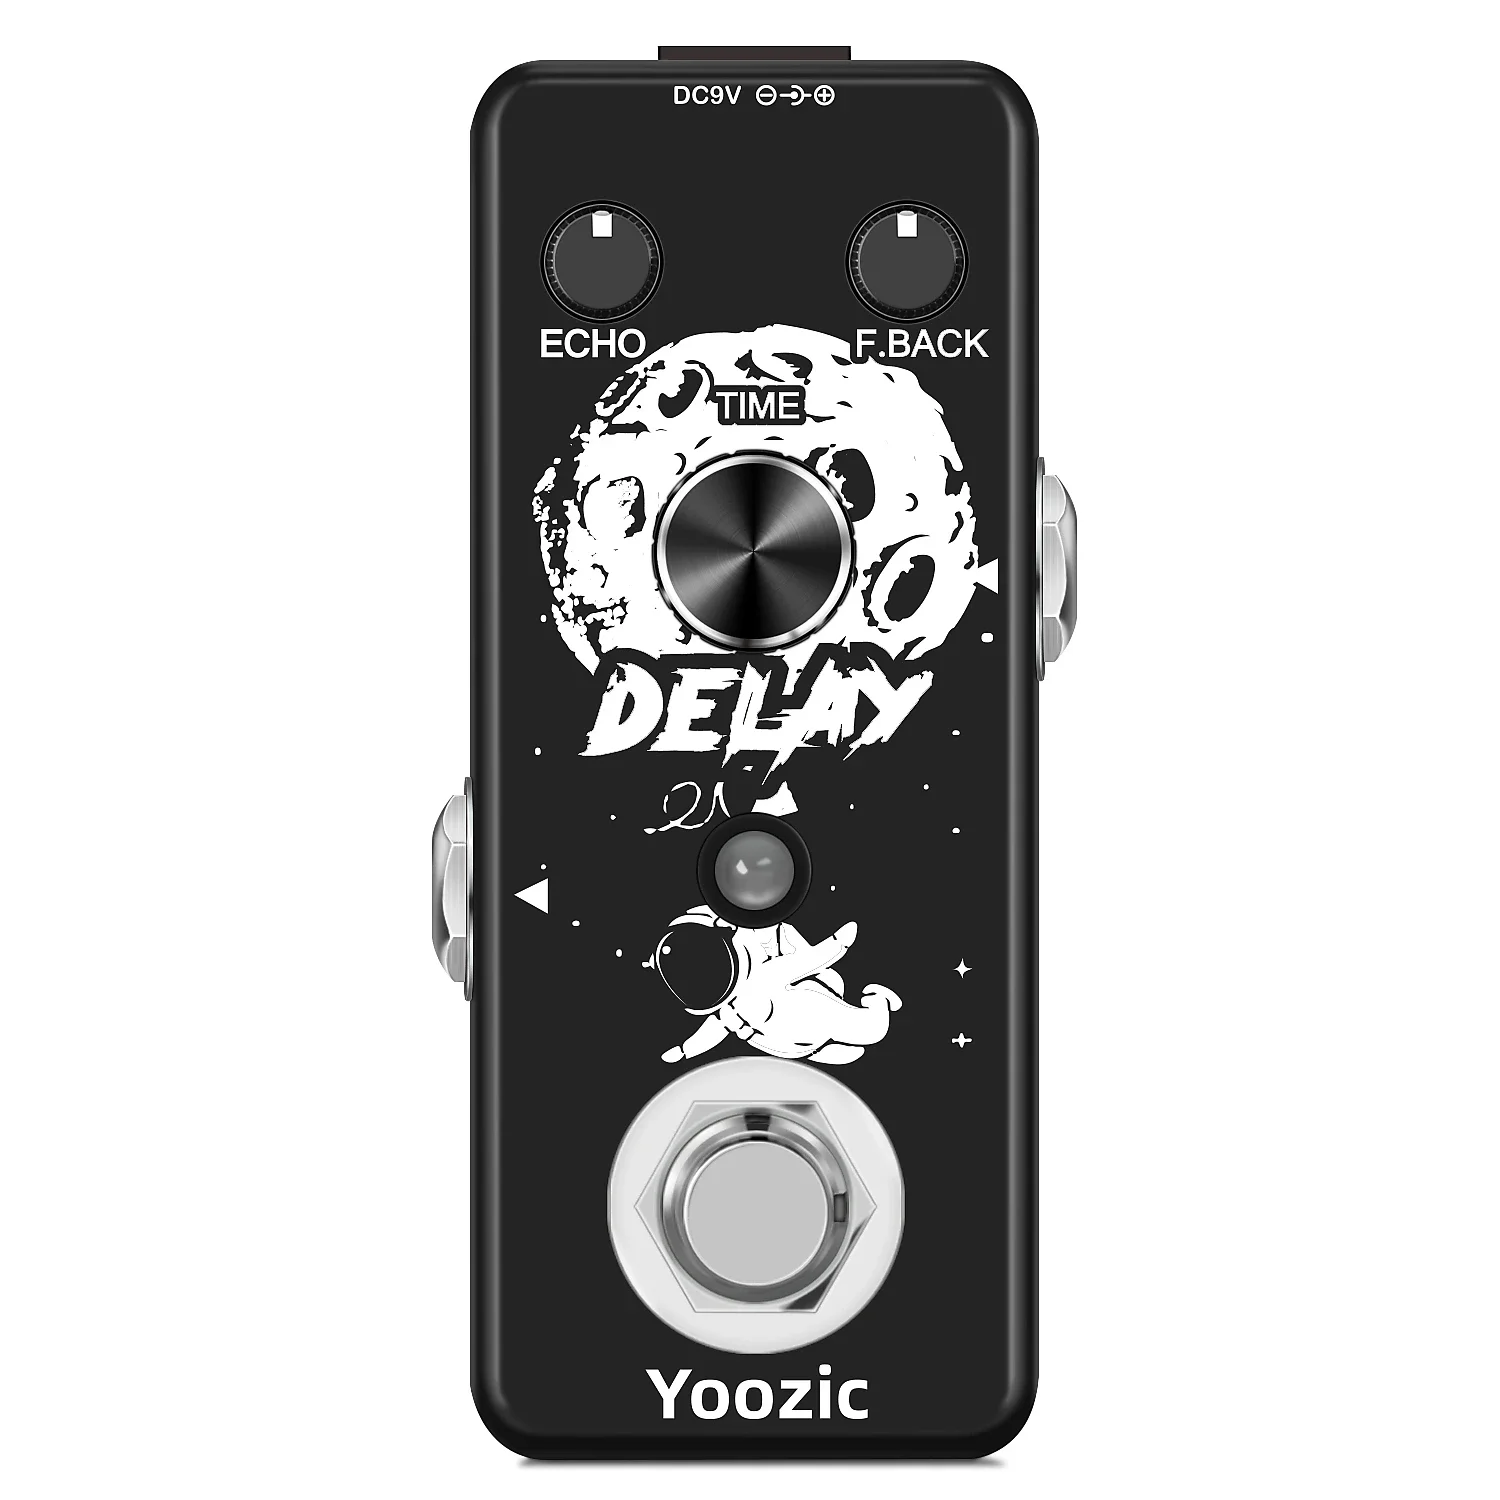 

Yoozic Guitar Echo Delay Pedals for Electric Guitar Analog Delay Effect Pedal Mini Size True Bypass